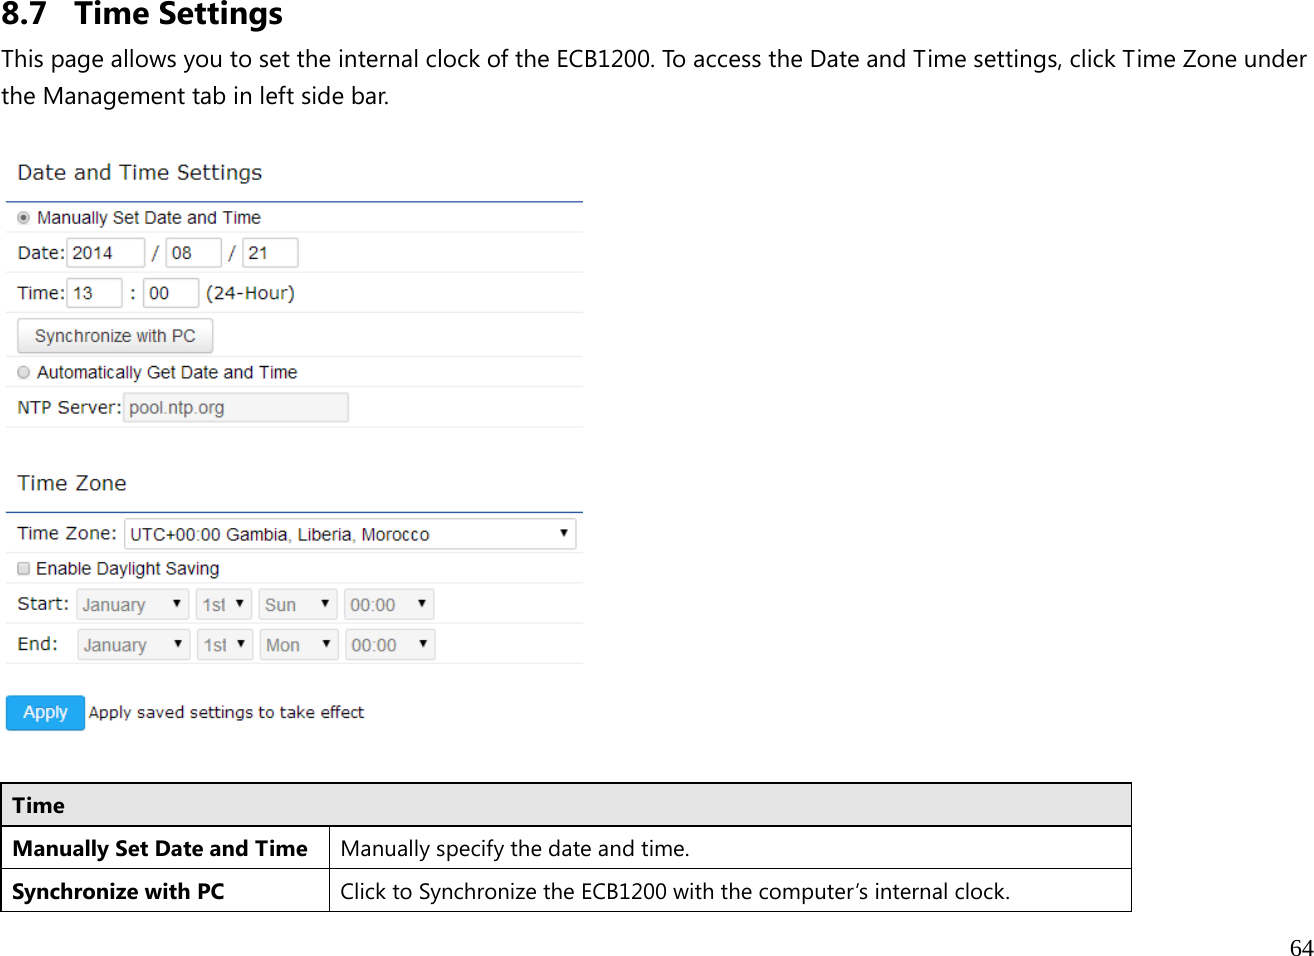  64  8.7 Time Settings This page allows you to set the internal clock of the ECB1200. To access the Date and Time settings, click Time Zone under the Management tab in left side bar.    Time Manually Set Date and Time Manually specify the date and time.Synchronize with PC  Click to Synchronize the ECB1200 with the computer’s internal clock. 